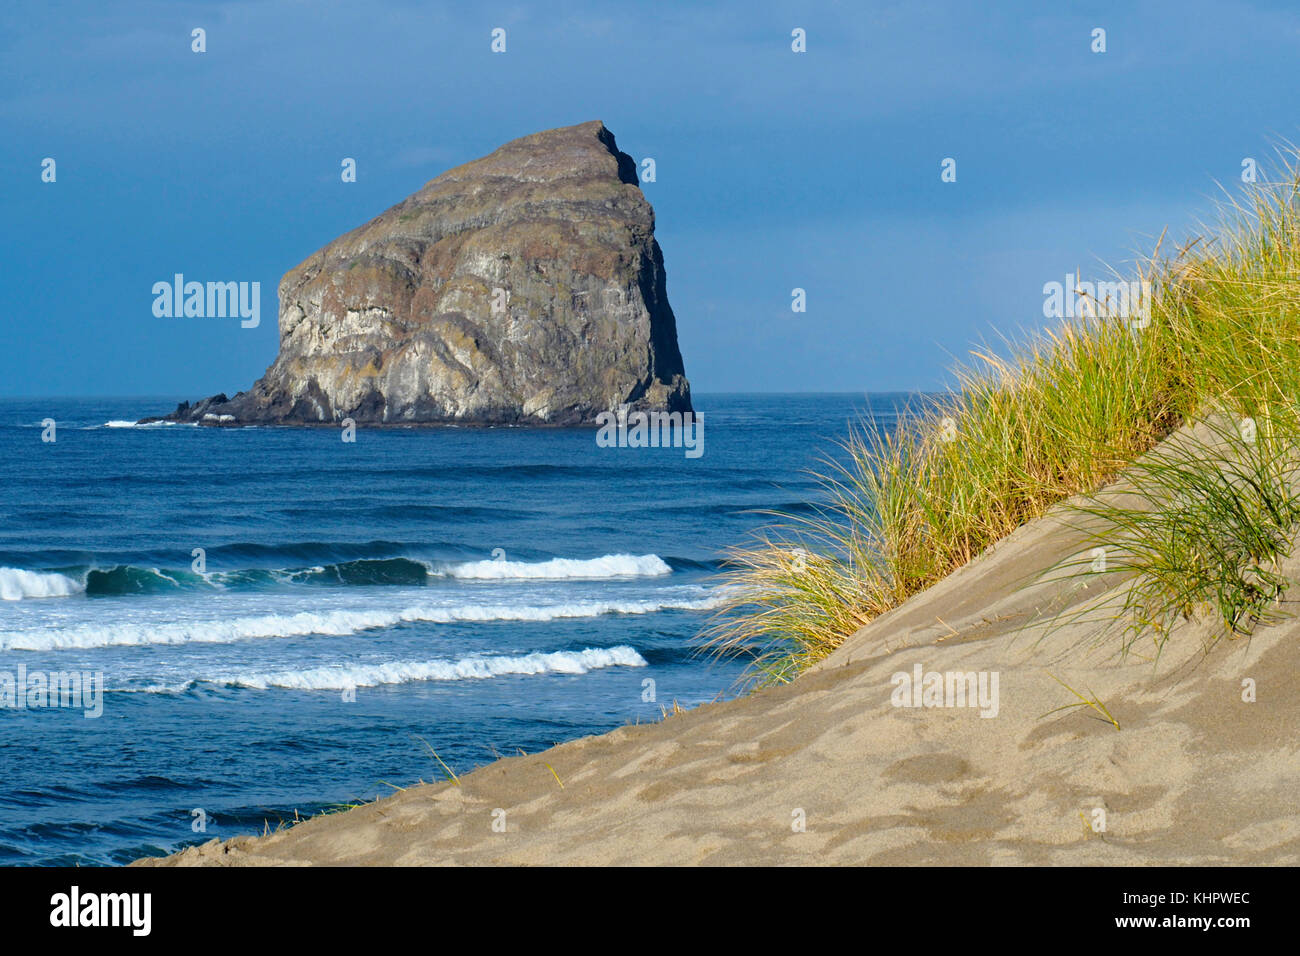 Beach and sand dunes on Cape Kiwanda at Pacific City wih large sea stack rock formation (Haystack or Chief Kiawanda Rock) offshore. Stock Photo